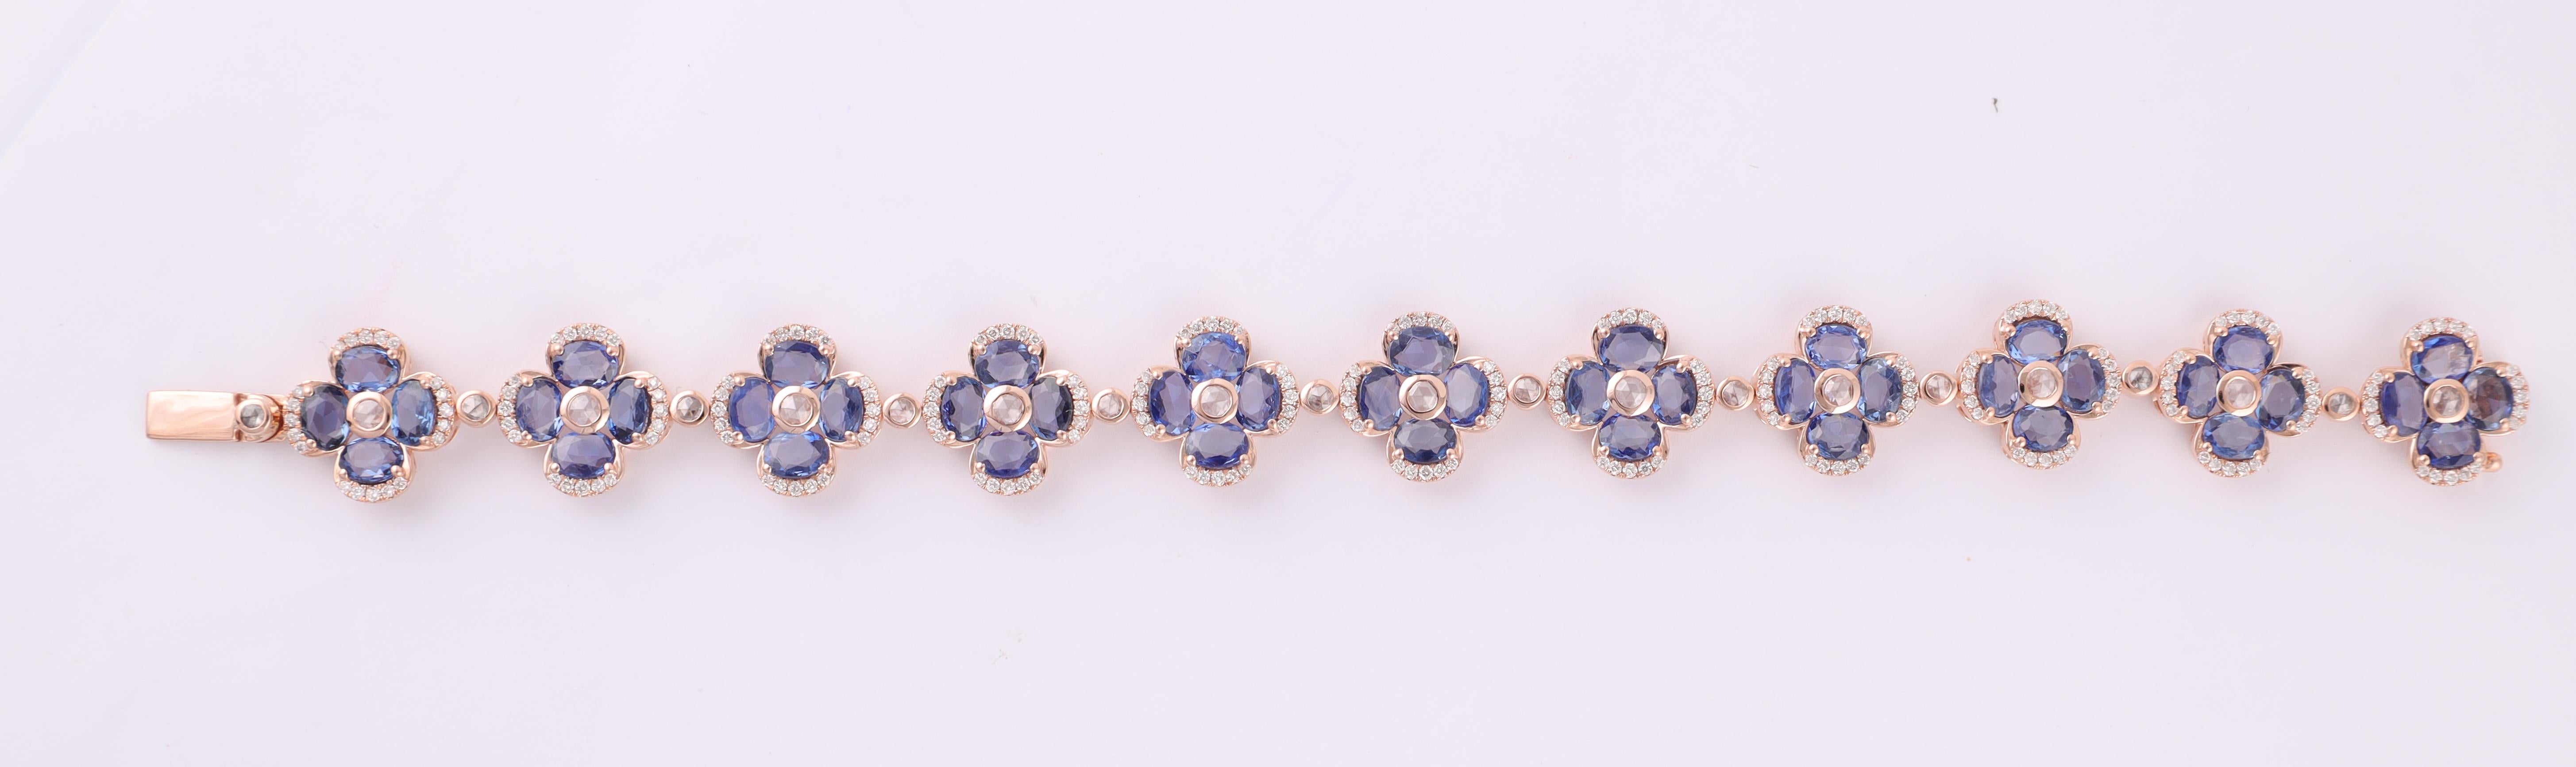 Contemporary 15.66 Carat Sapphire and Diamond Bracelet in 18k White Gold For Sale